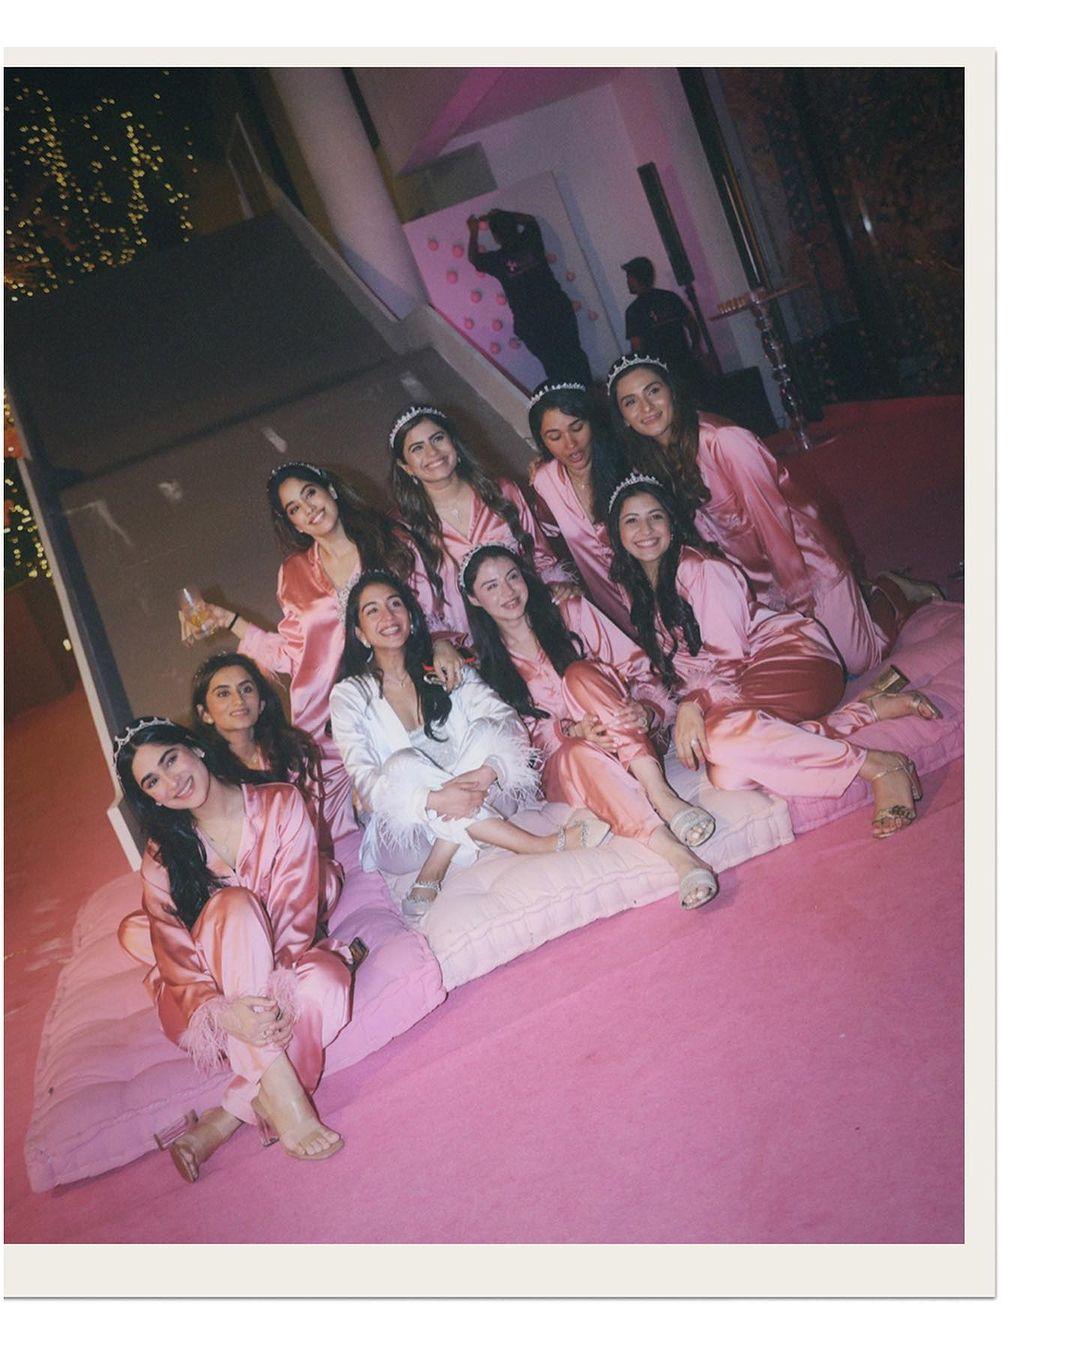 In this picture, Janhvi posed with a wide smile with all the lovely ladies and the bride herself